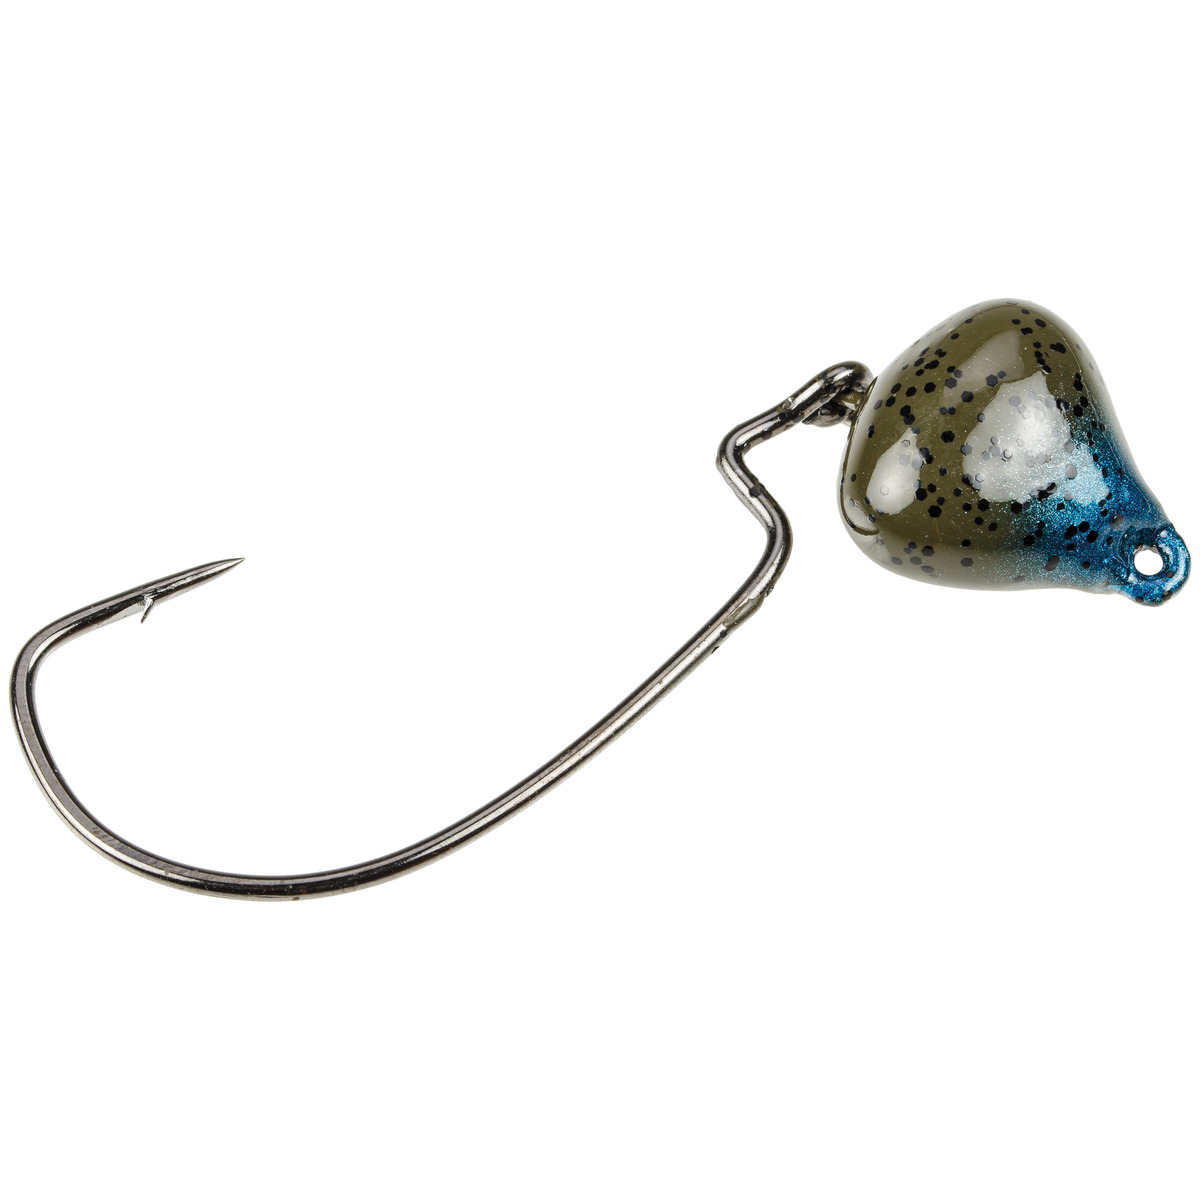 Strike King Md Jointed Structure Head - Blue Craw 10.6G